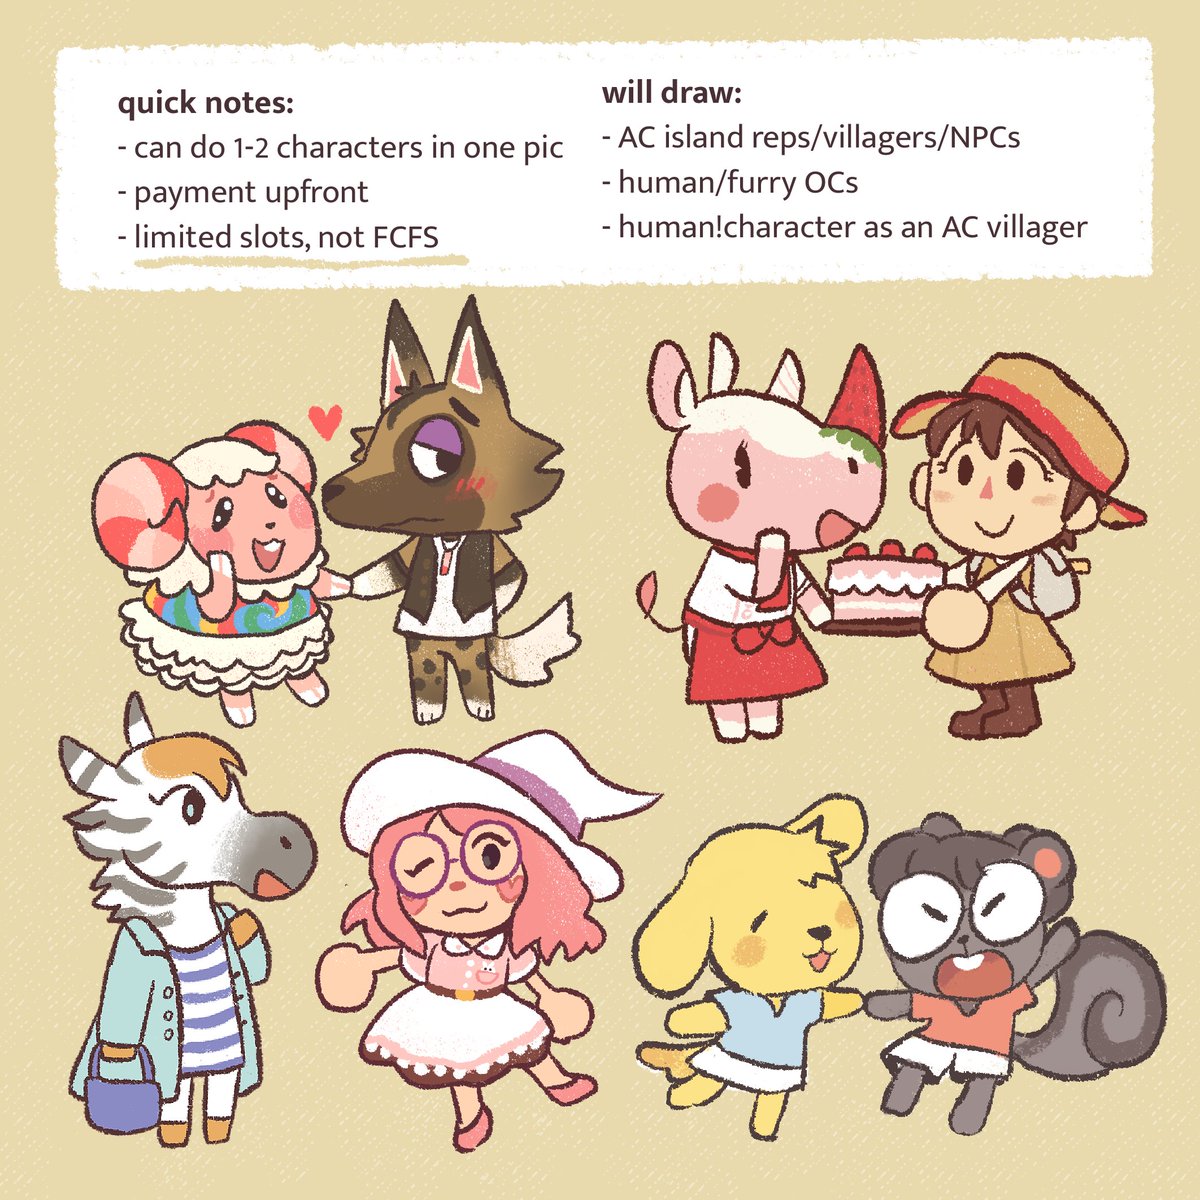 good evening!! commissions are open for a short while, for ACNH items and real money!!   https://laughingbearcomm.weebly.com/   please check out my site if you're interested! ;v;